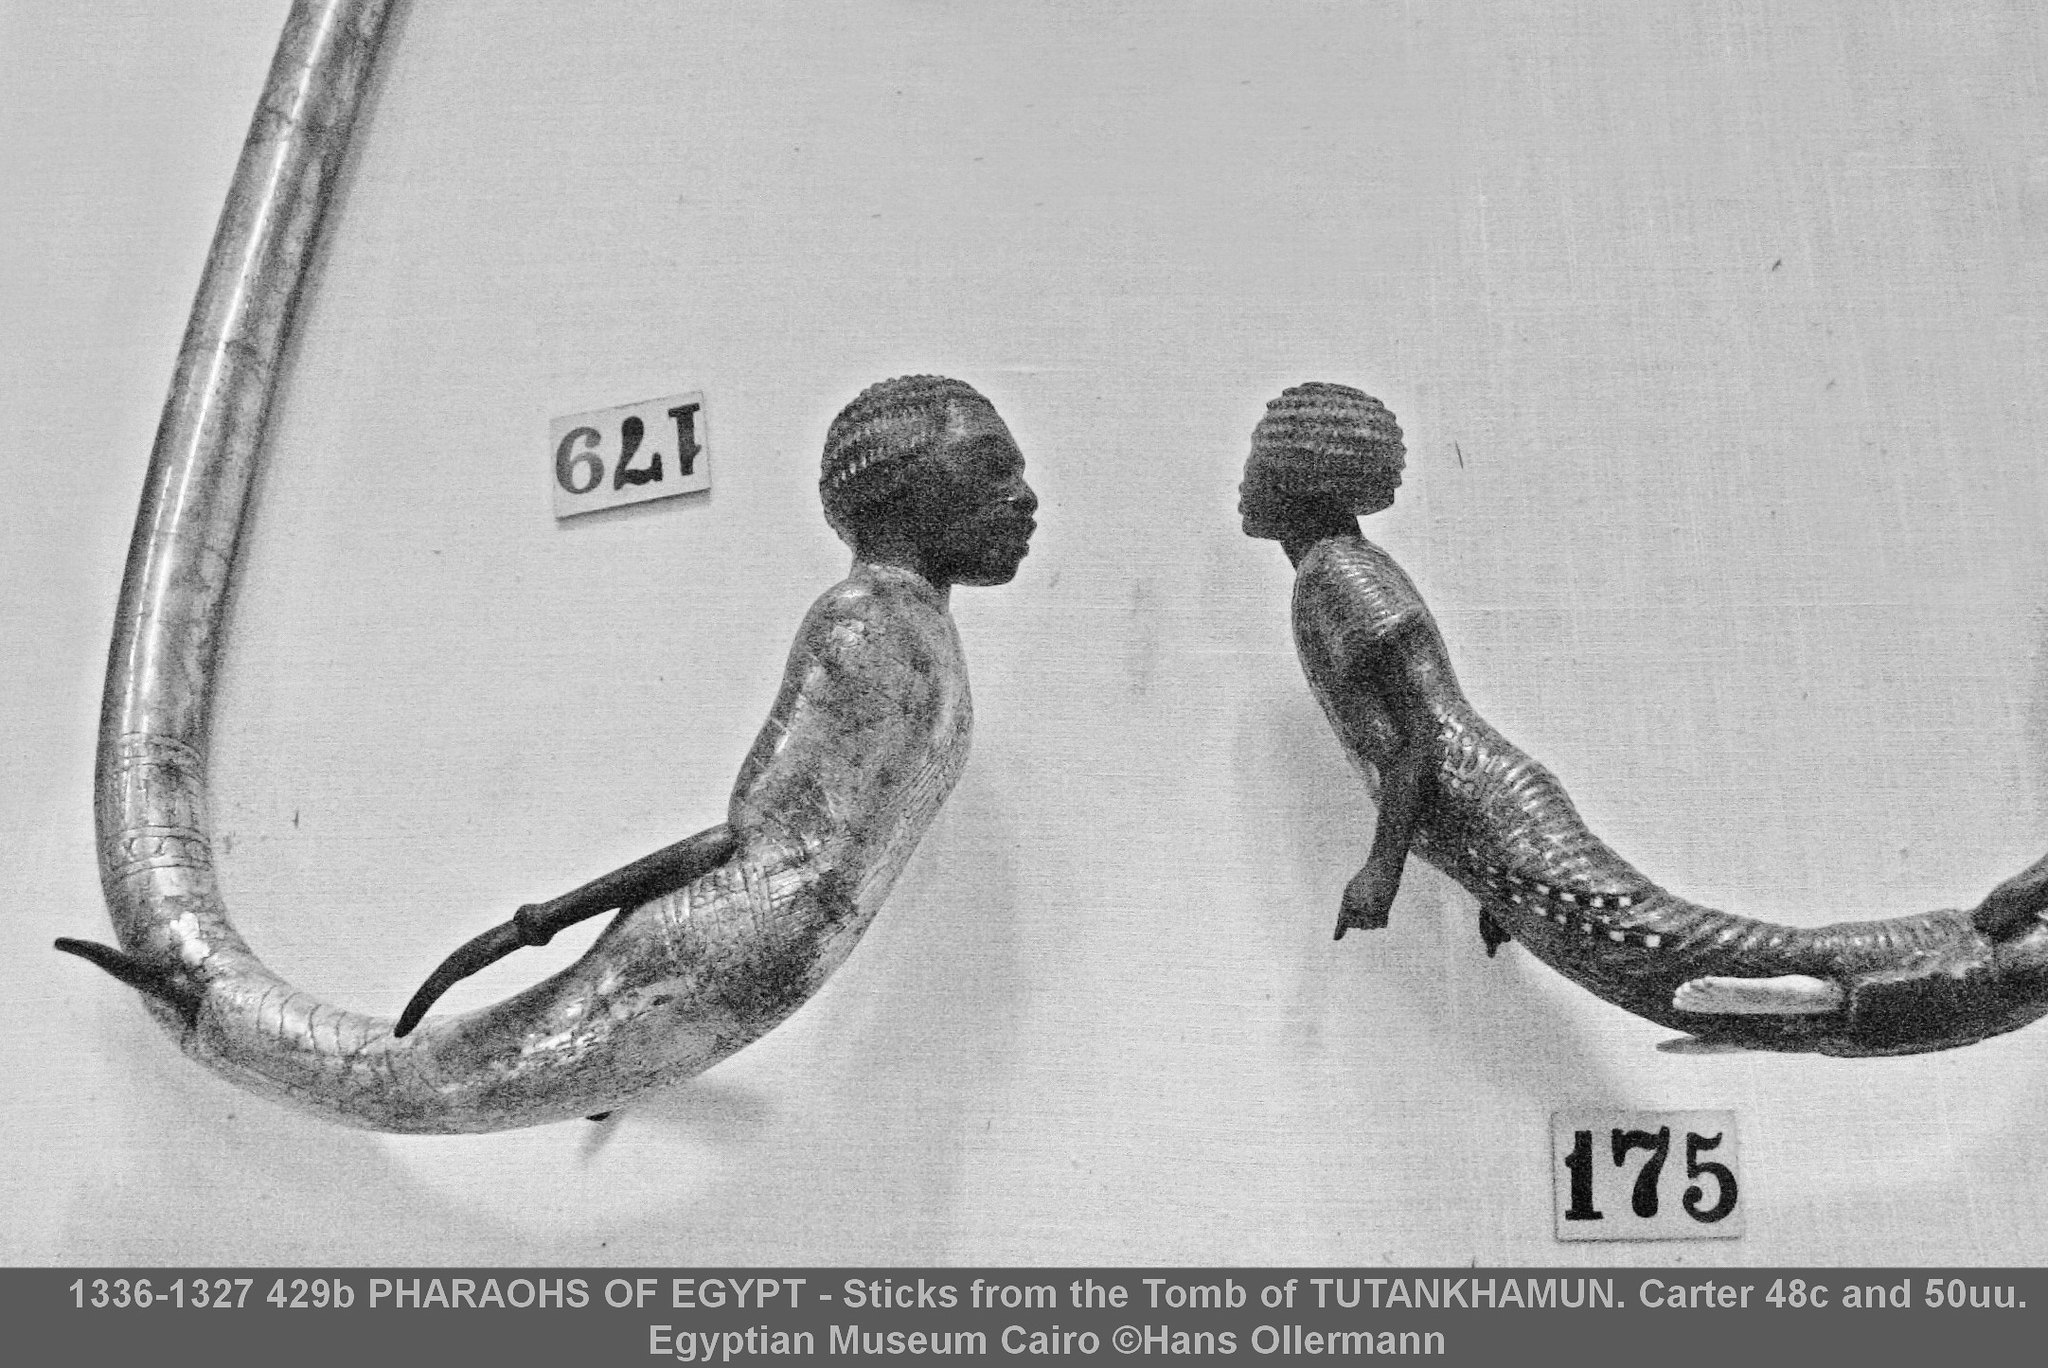 Sticks from the Tomb of TUTANKHAMUN. Carter 48c and 50uu. Egyptian Museum Cairo :copyright:Hans Ollermann Stick with crook composed of bound African prisoner. CARTER 48c BURTON 335 JE 61736; Exhib. 179 and Ceremonial stick of unknown use (detail). CARTER 50uu BURTON 338-341. JE 61732; Exhib. 175